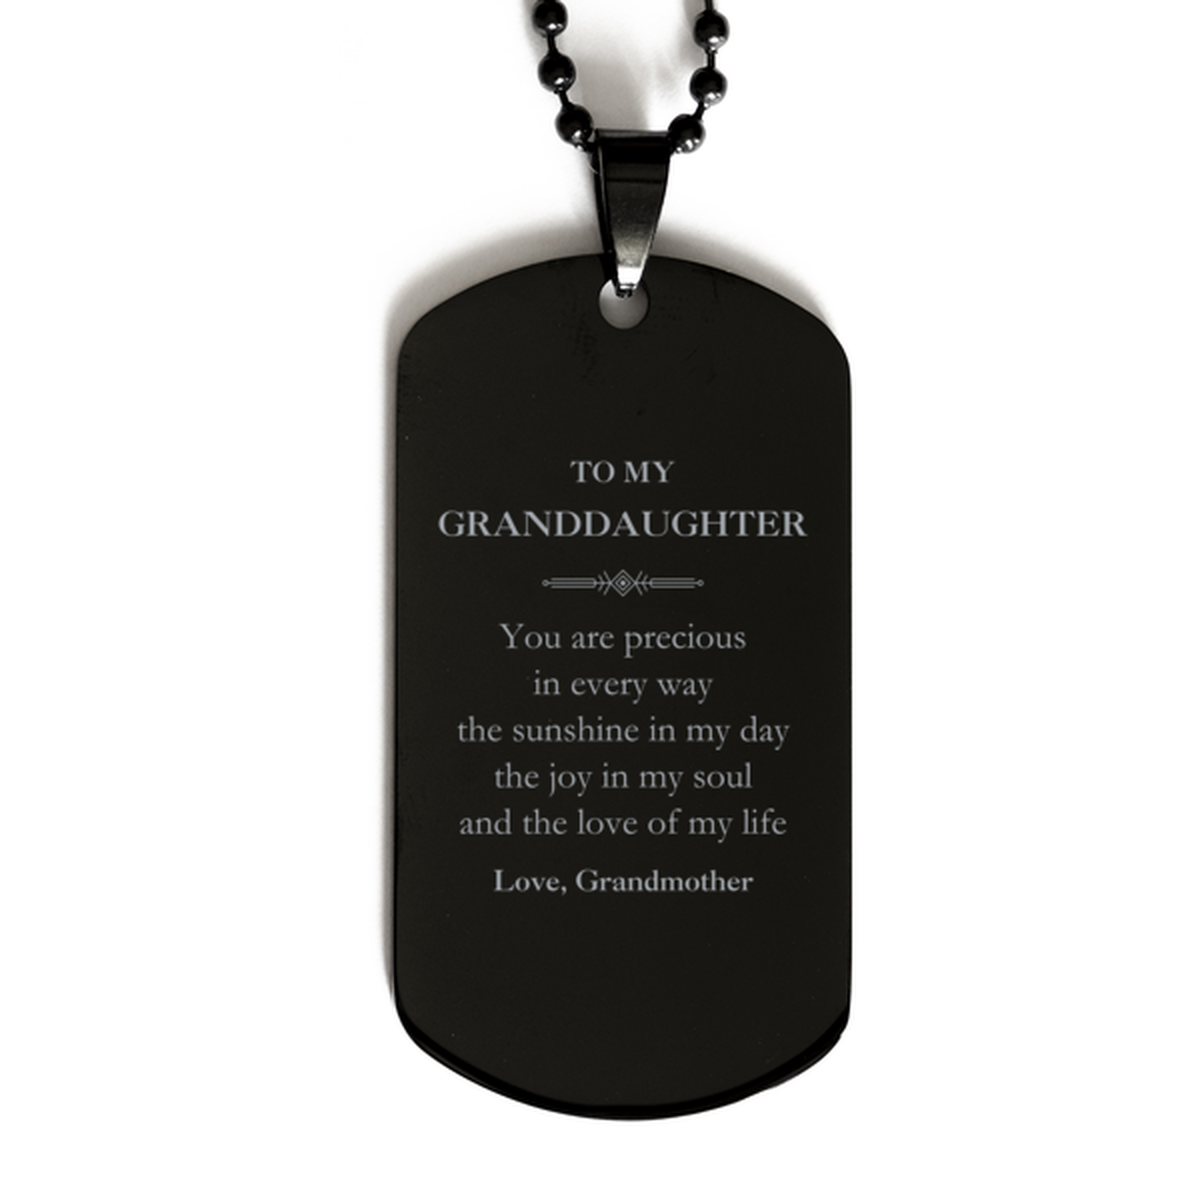 Graduation Gifts for Granddaughter Black Dog Tag Present from Grandmother, Christmas Granddaughter Birthday Gifts Granddaughter You are precious in every way the sunshine in my day. Love, Grandmother